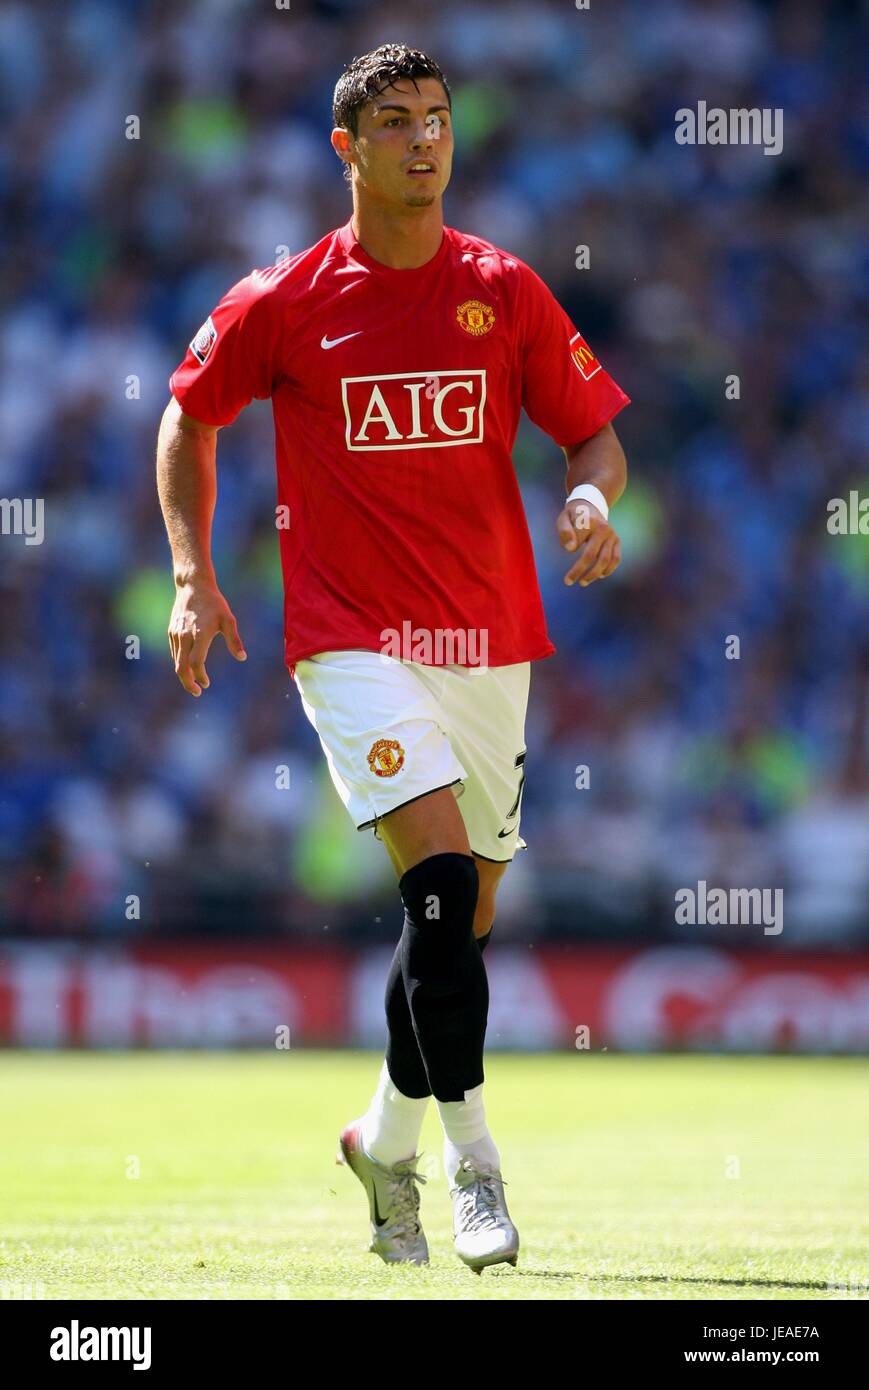 CRISTIANO RONALDO MANCHESTER UNITED FC WEMBLEY Londres Angleterre 05 Août 2007 Banque D'Images